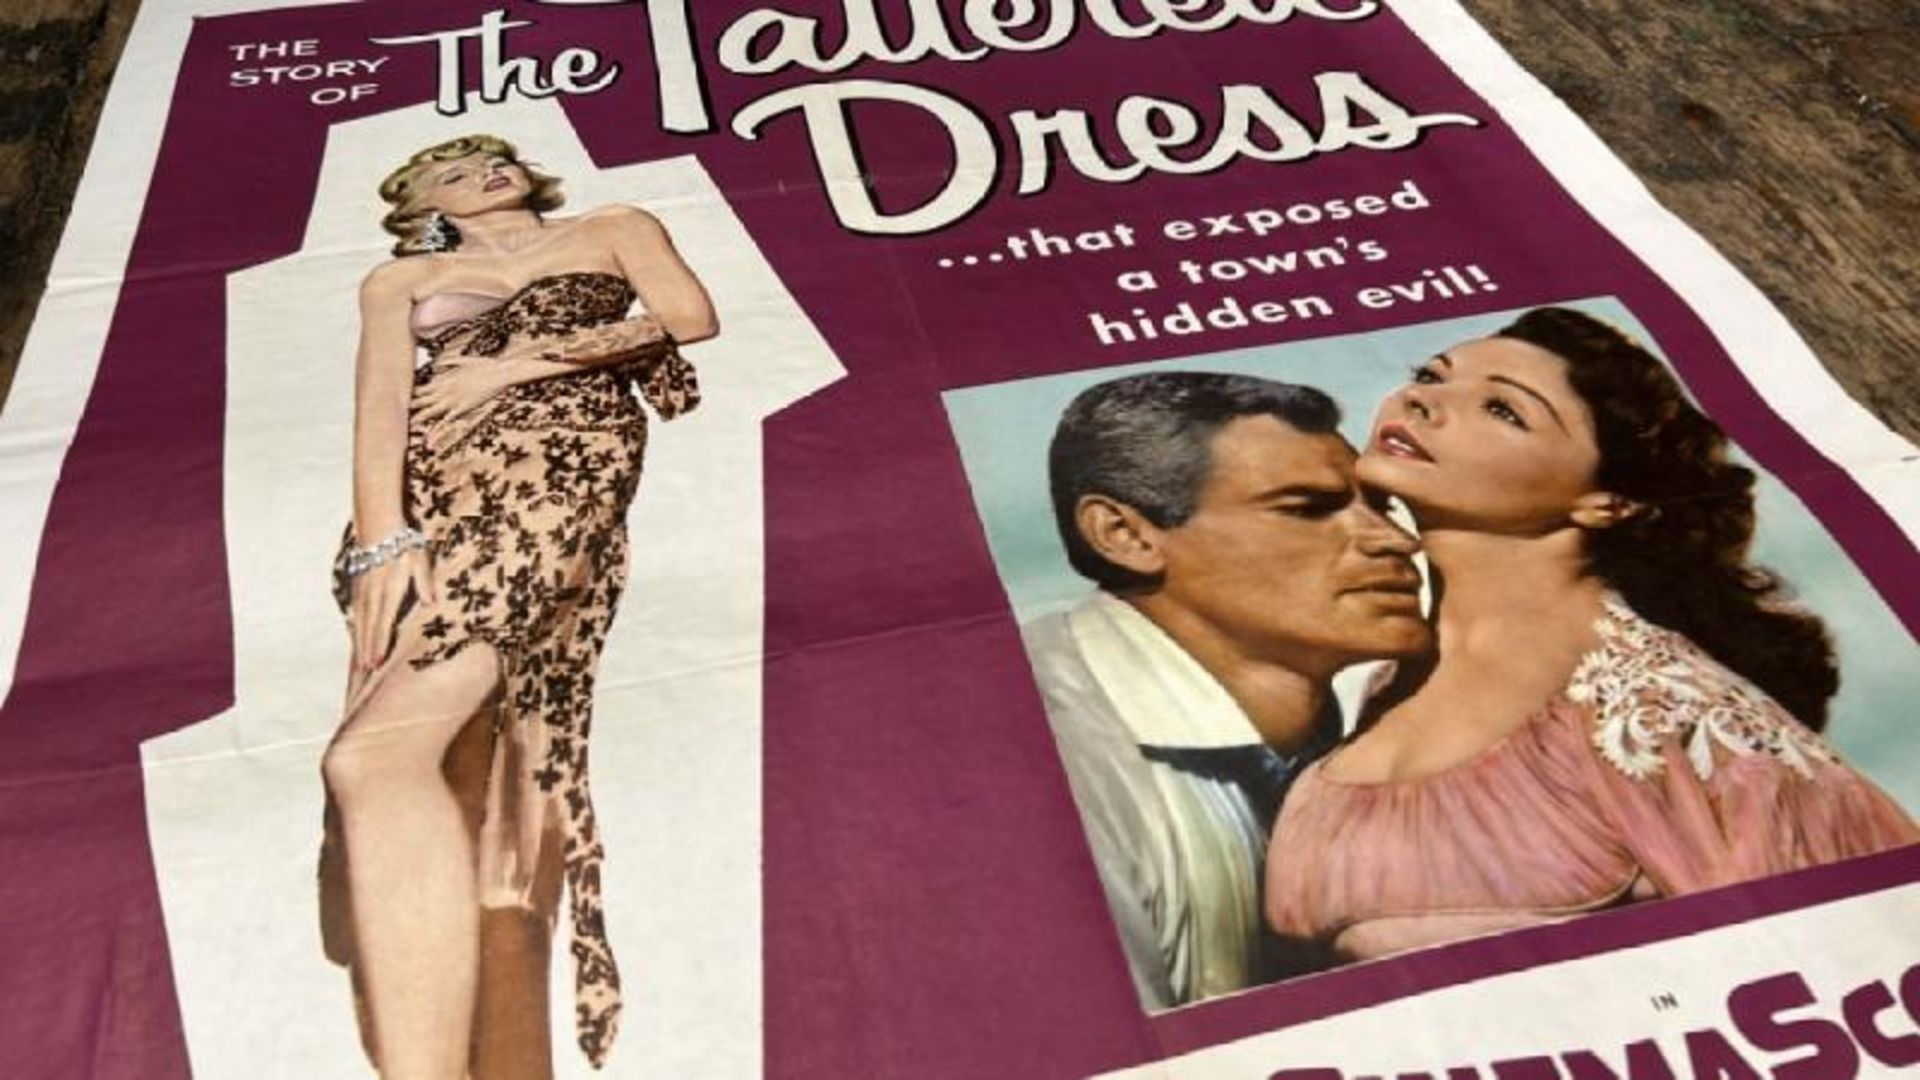 THE STORY OF THE TATTERED DRESS, ORIGINAL FILM POSTER, 57/94, 68CM W X 104CM H - Image 4 of 4